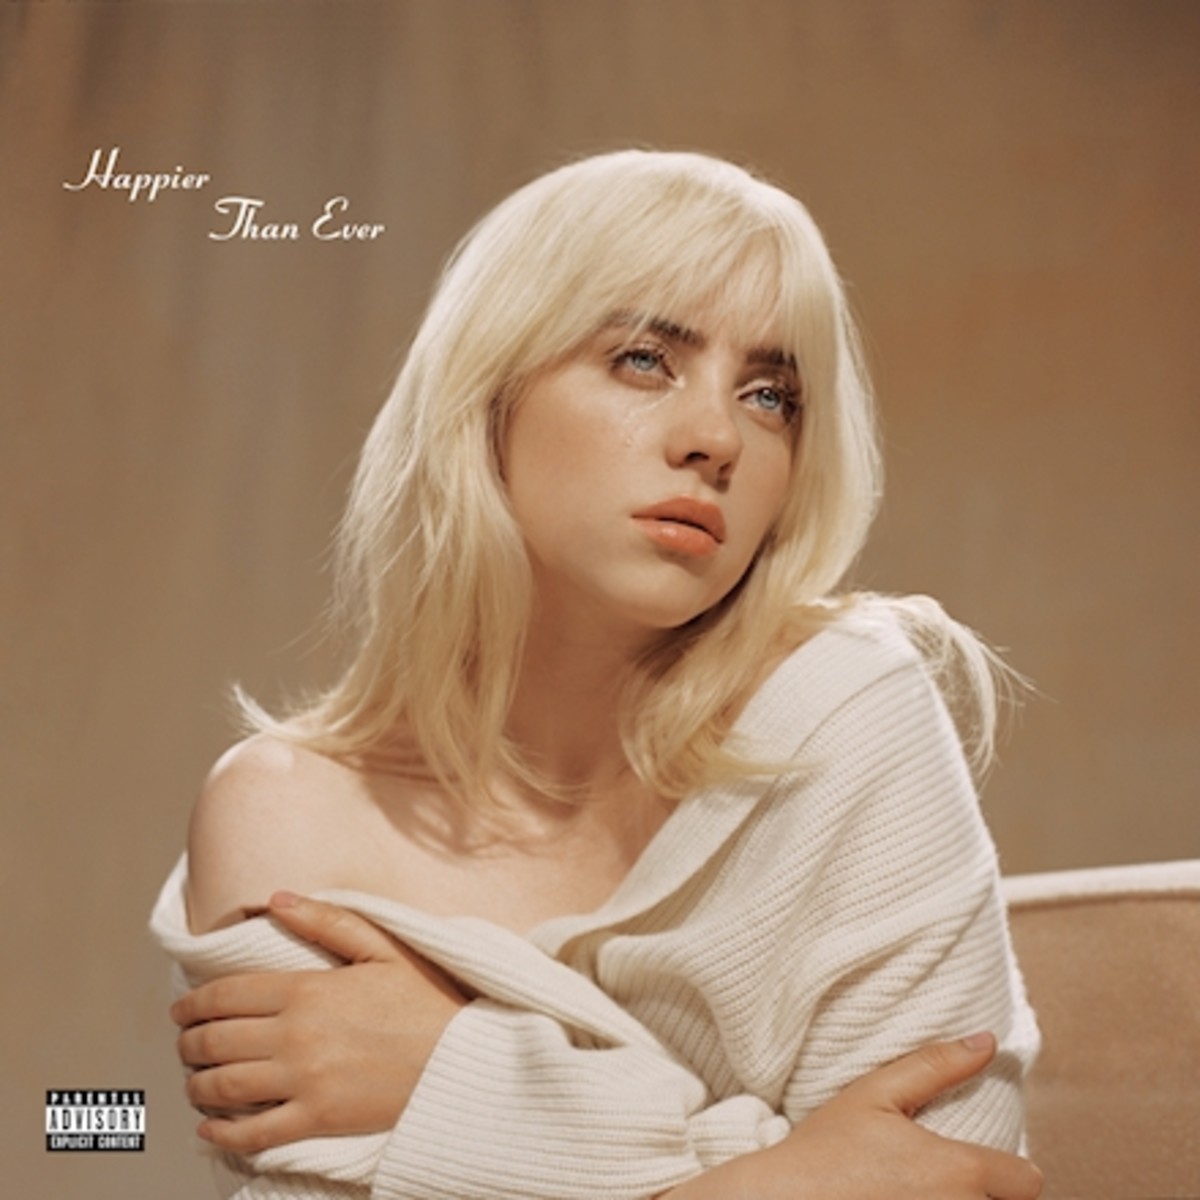 "Happier Than Ever" cover art